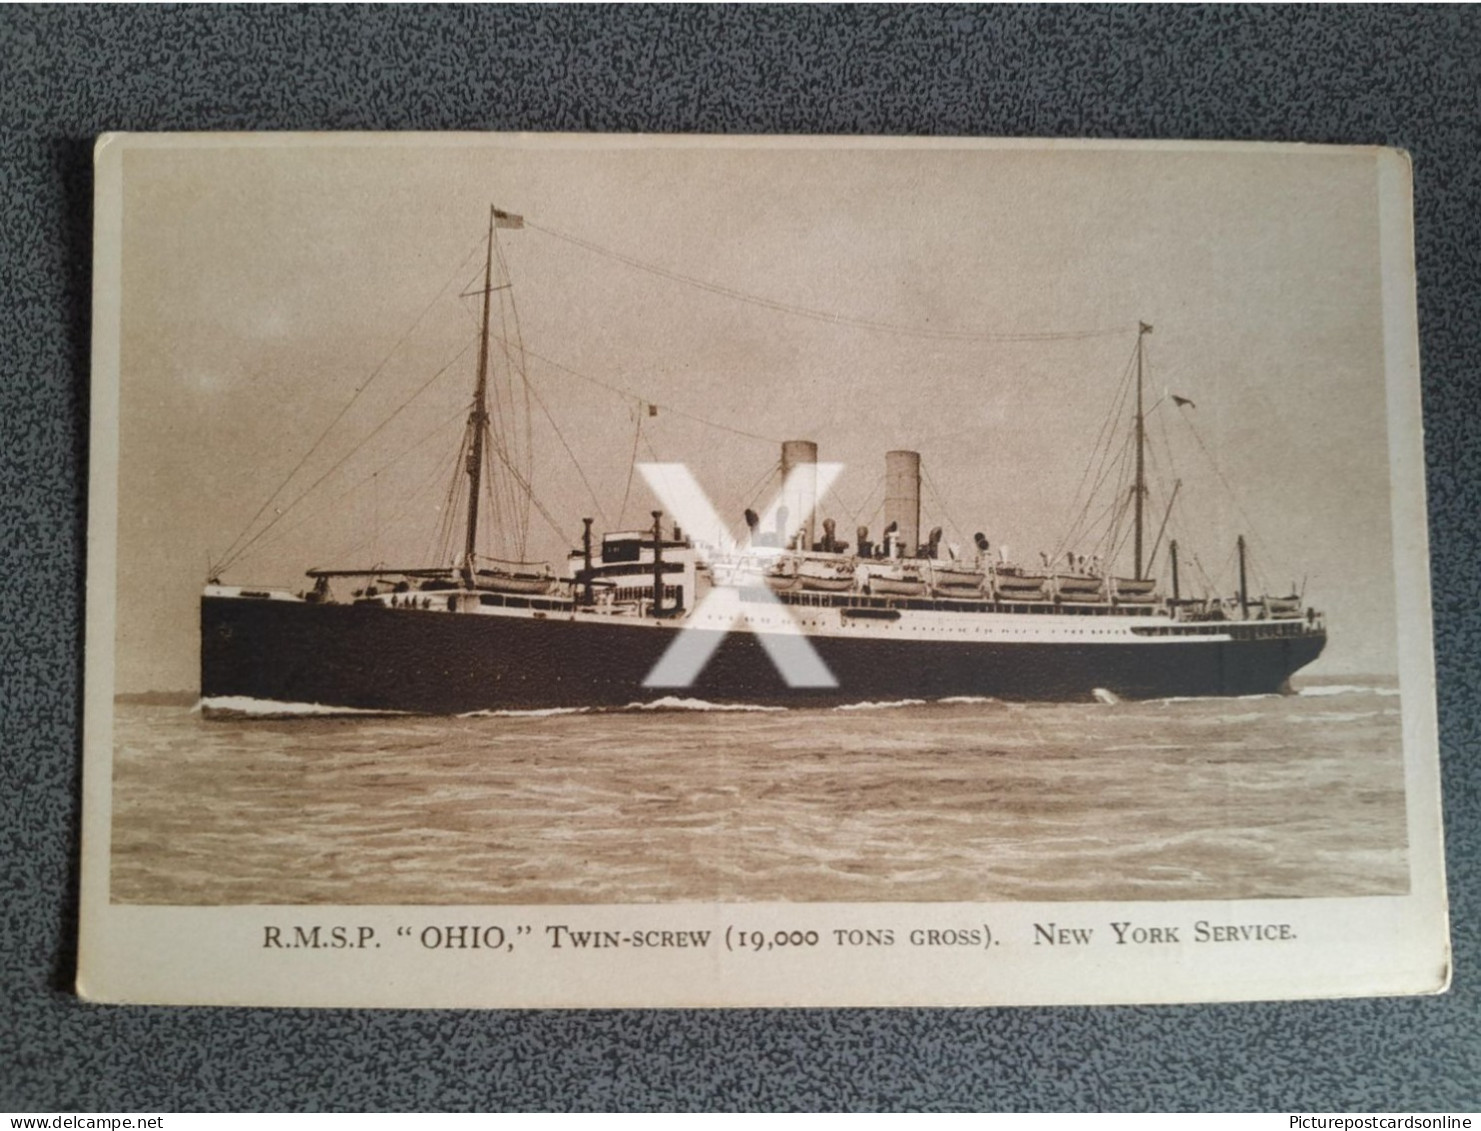 ROYAL MAIL STEAM PACKET OHIO OLD B/W POSTCARD STEAMER SHIPPING NEW YORK SERVICE RMSP AGENT HOSPITAL STREET PERTH - Dampfer